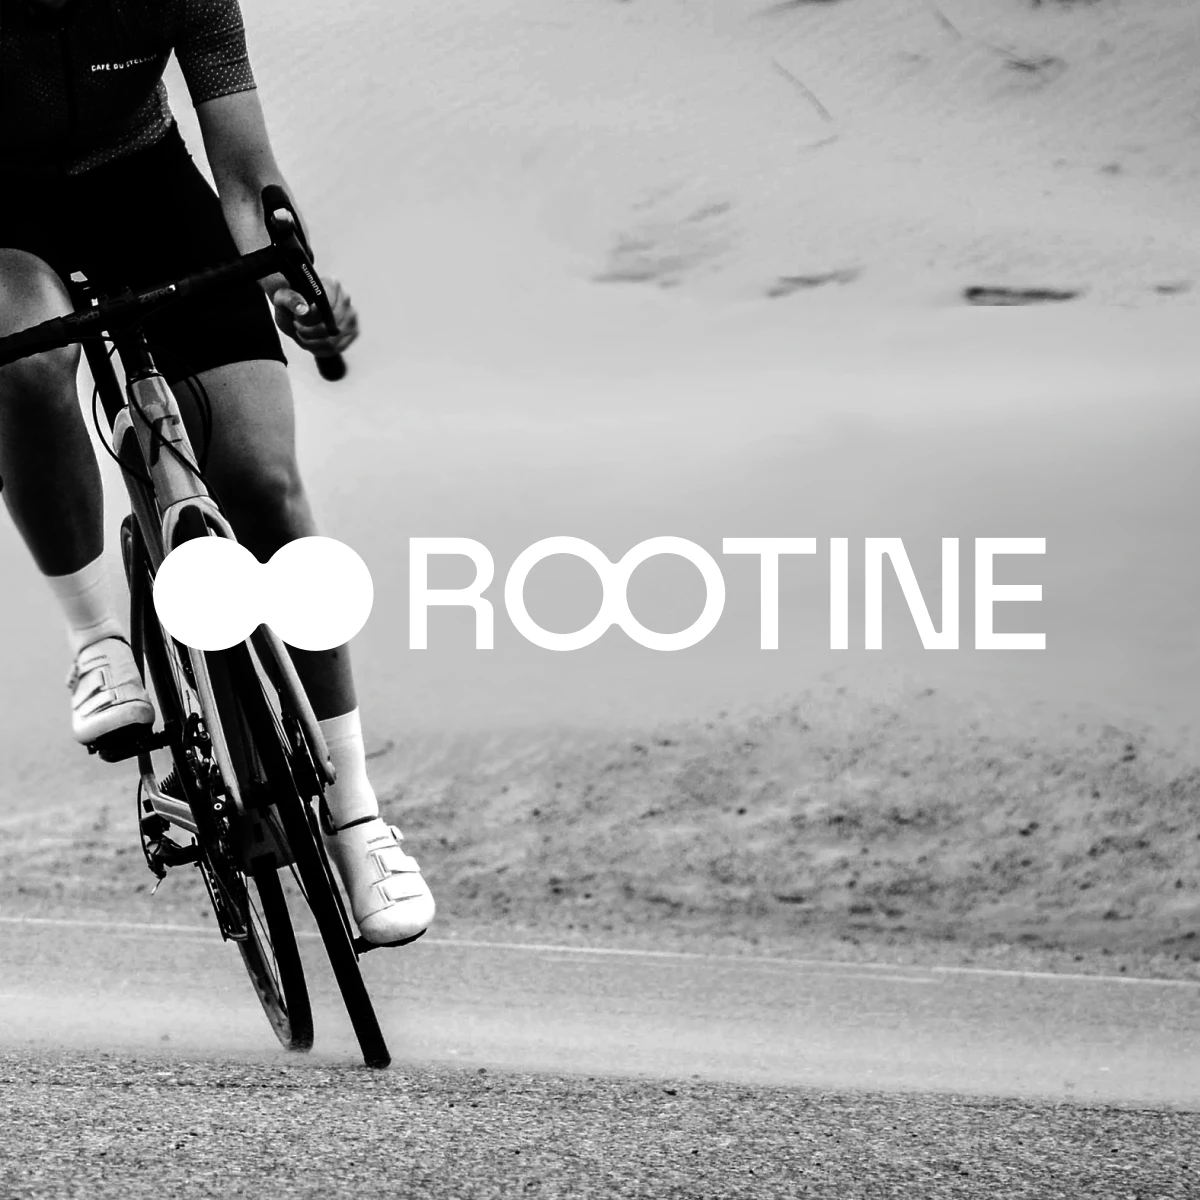 link card for the project Rootine showing a cyclist and the Rootine logo